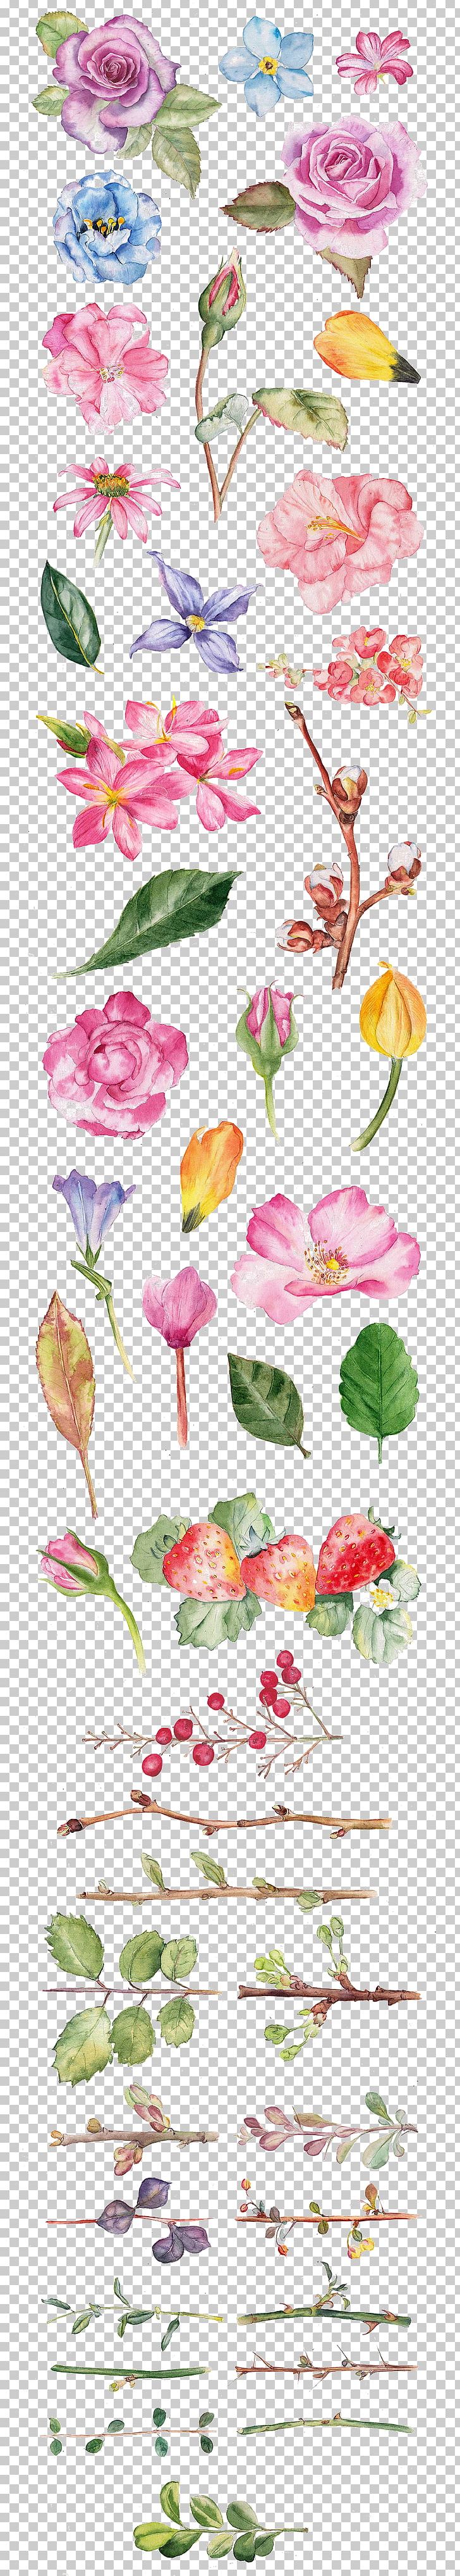 Watercolor Painting Flower Drawing Illustration PNG, Clipart, Cut ...